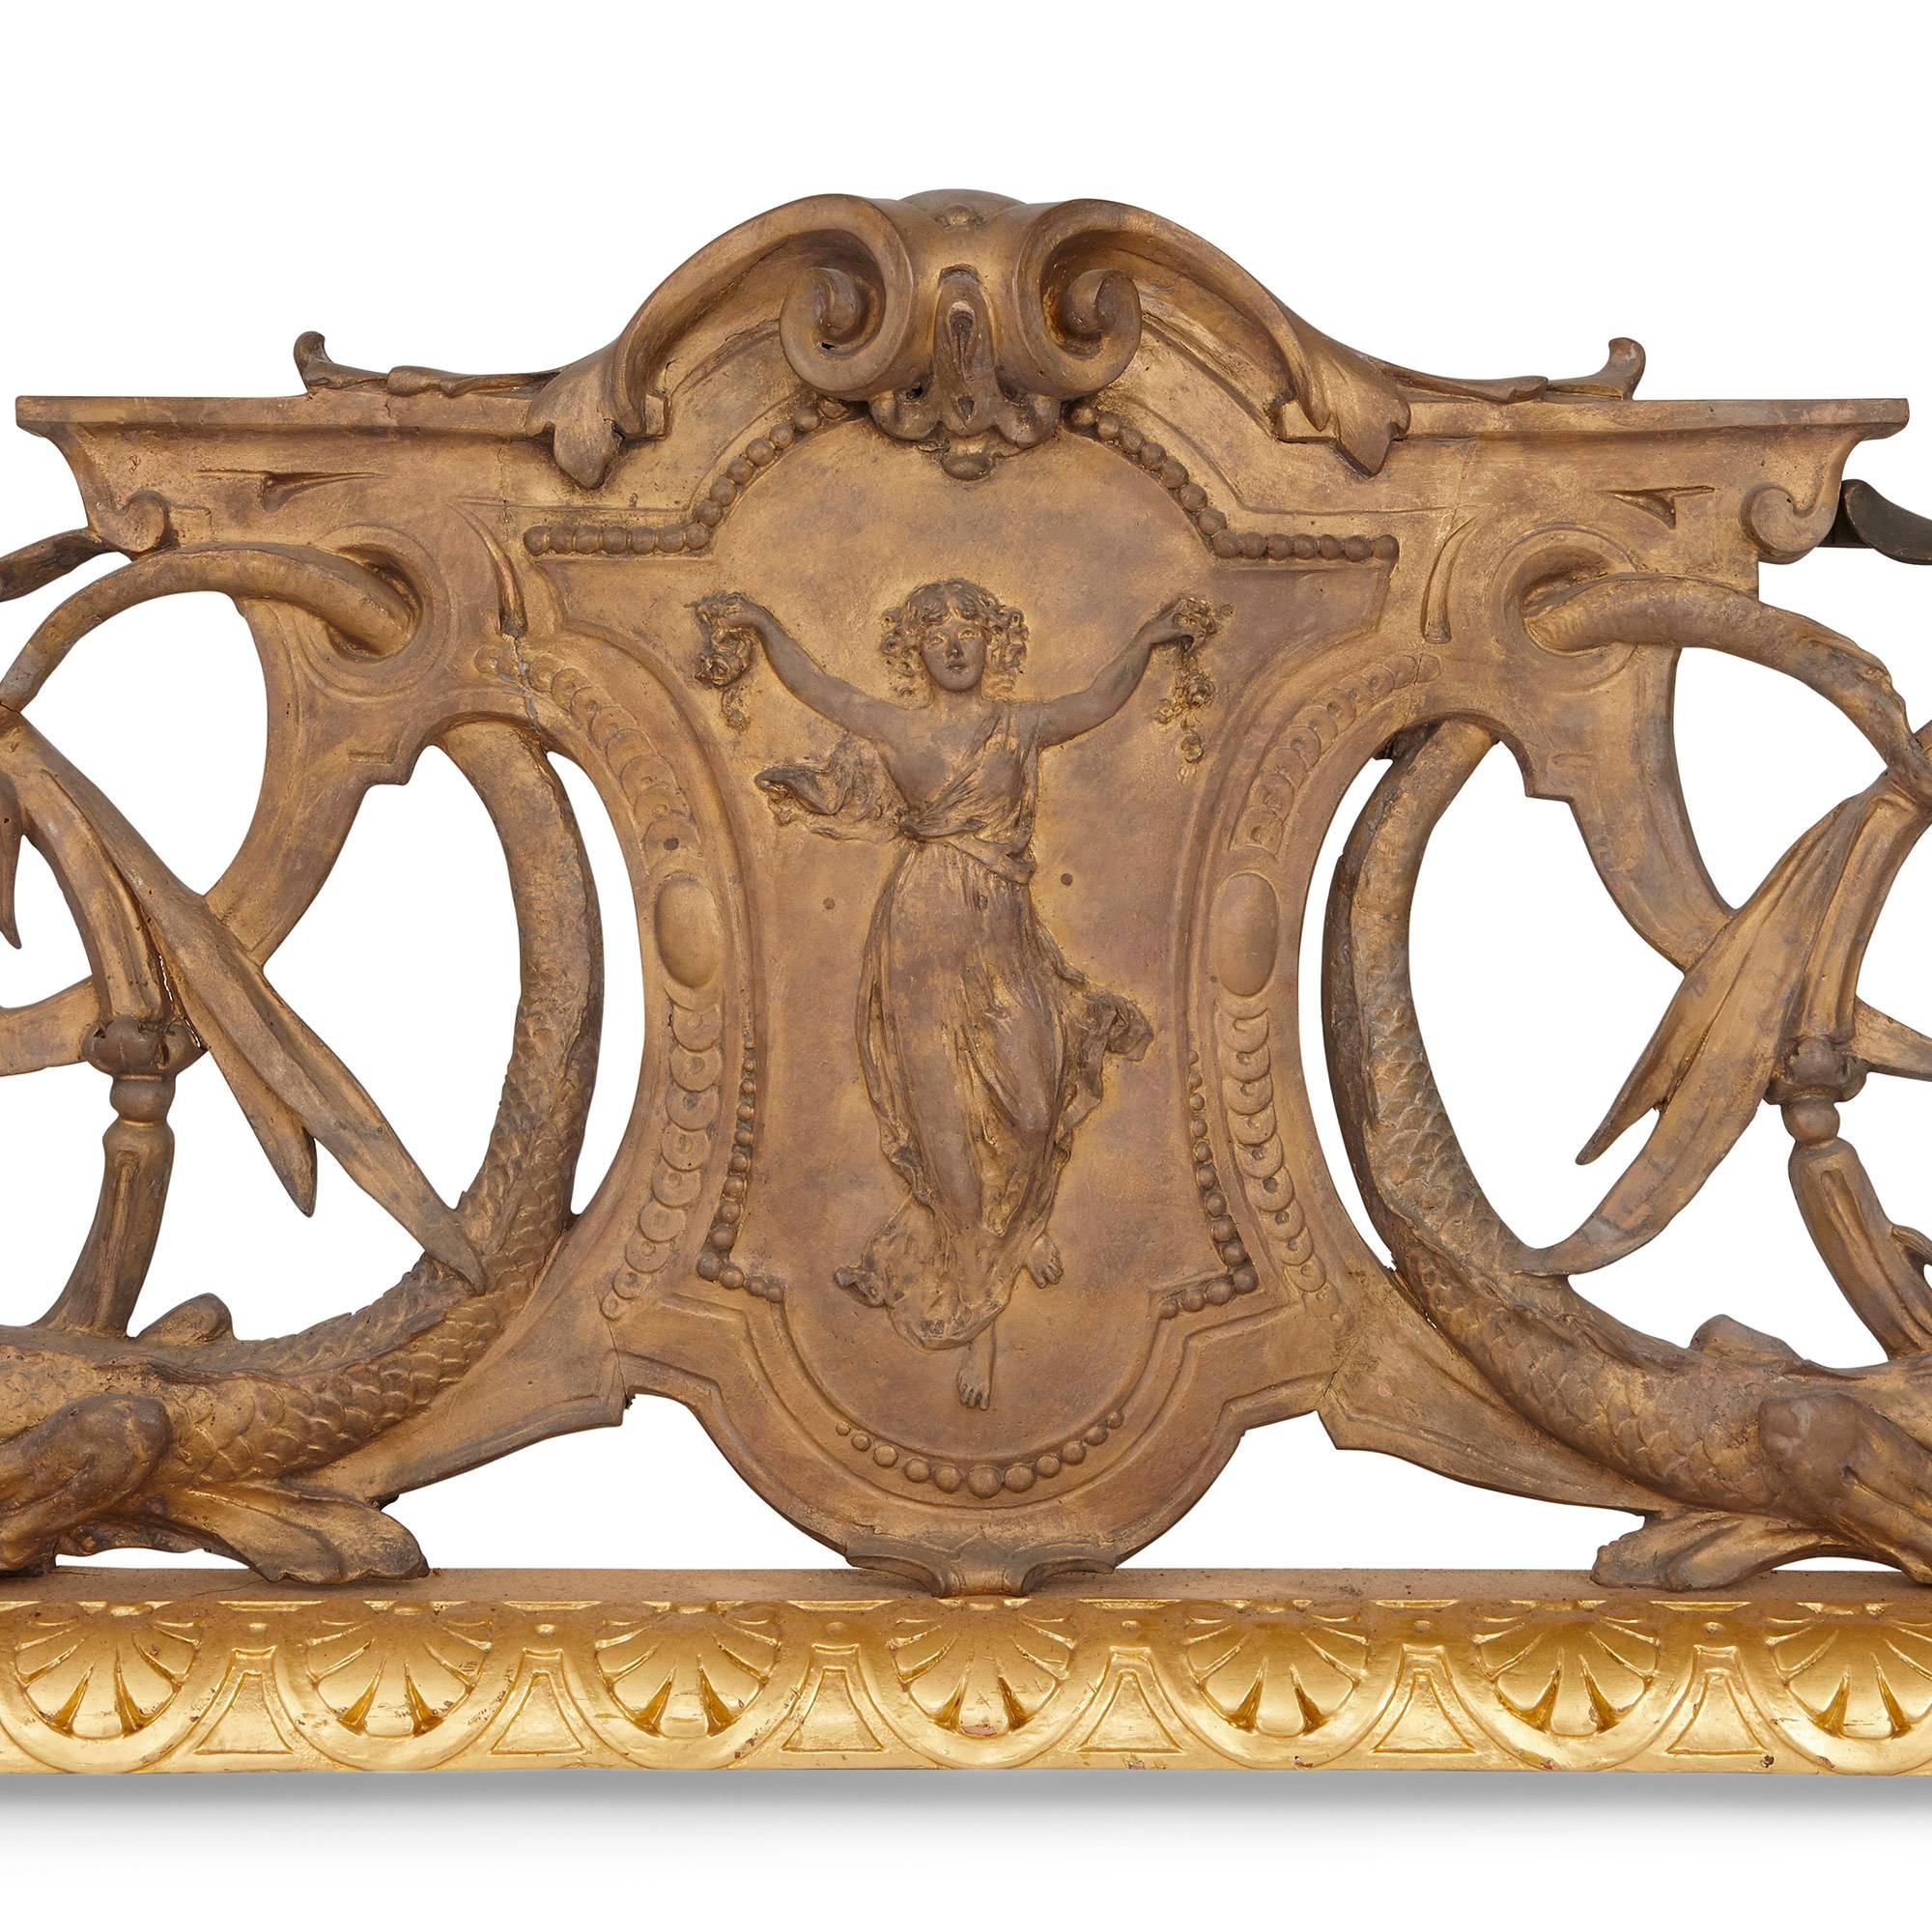 This stunning antique French fireplace is unusual for its stylistic fusion, which combines motifs from a range of different design periods.

Most striking are the neo-Gothic depictions of dragons, which sit at either end of the fender. These take